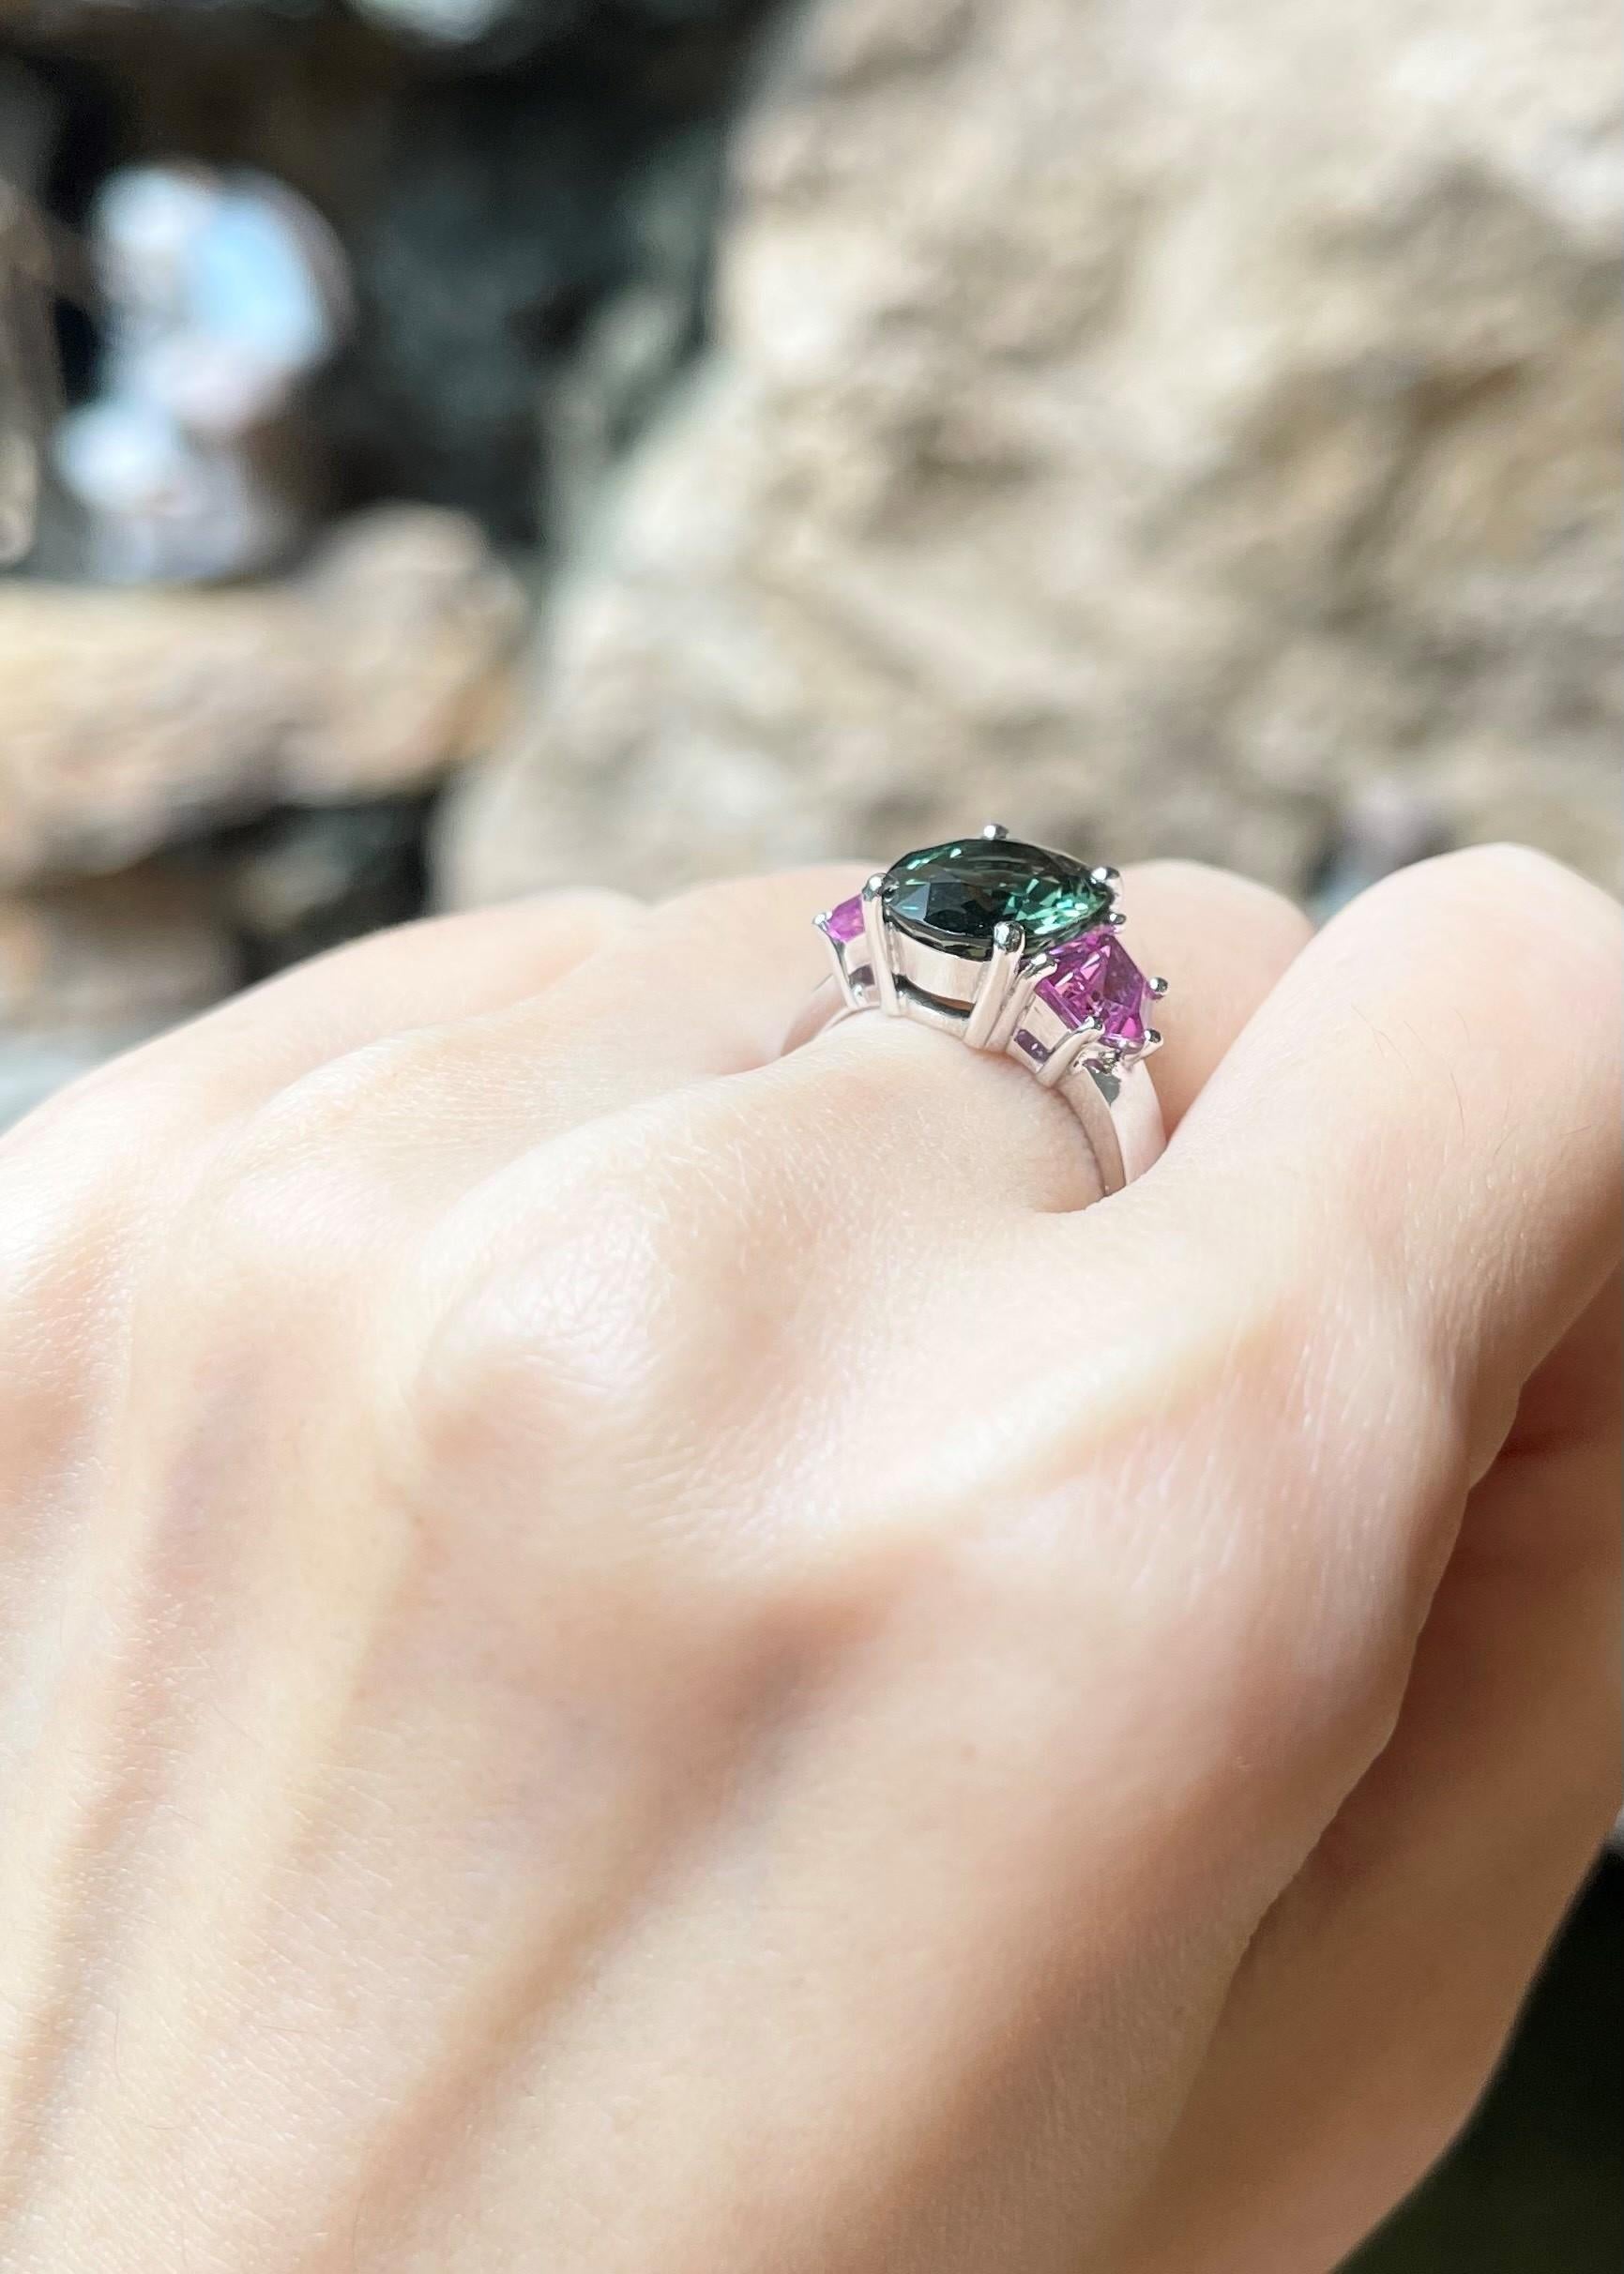 Green Sapphire 4.36 carats with Pink Sapphire 1.86 carats Ring set in 18K White Gold Settings 

Width:  1.8 cm 
Length: 1.1 cm
Ring Size: 54
Total Weight: 8.25 grams

Green Sapphire
Width:  0.8 cm 
Length: 1.1 cm

